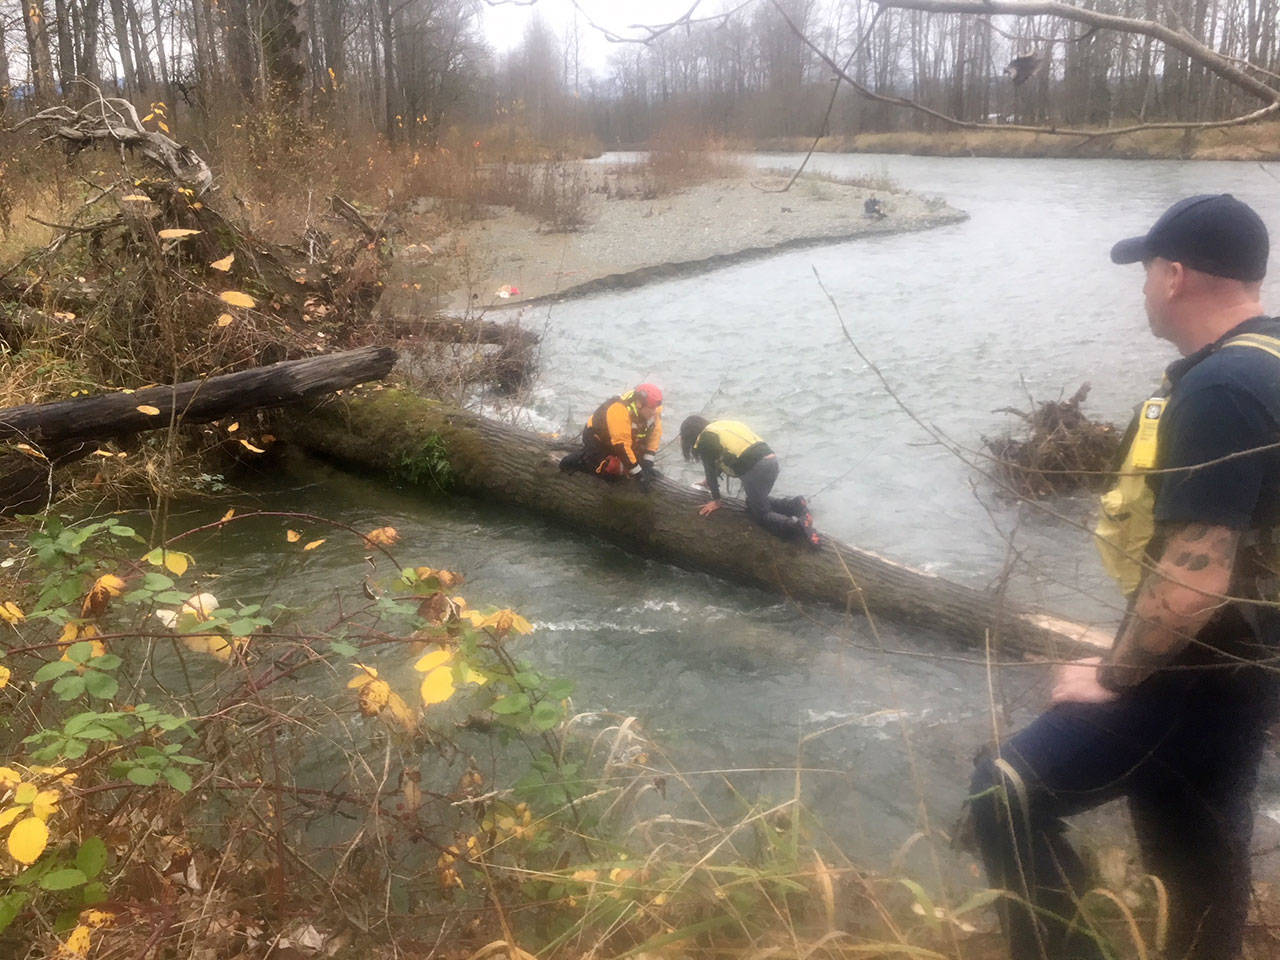 A King County officer goes out on the log to help the woman get back to shore. (Courtesy Photo)